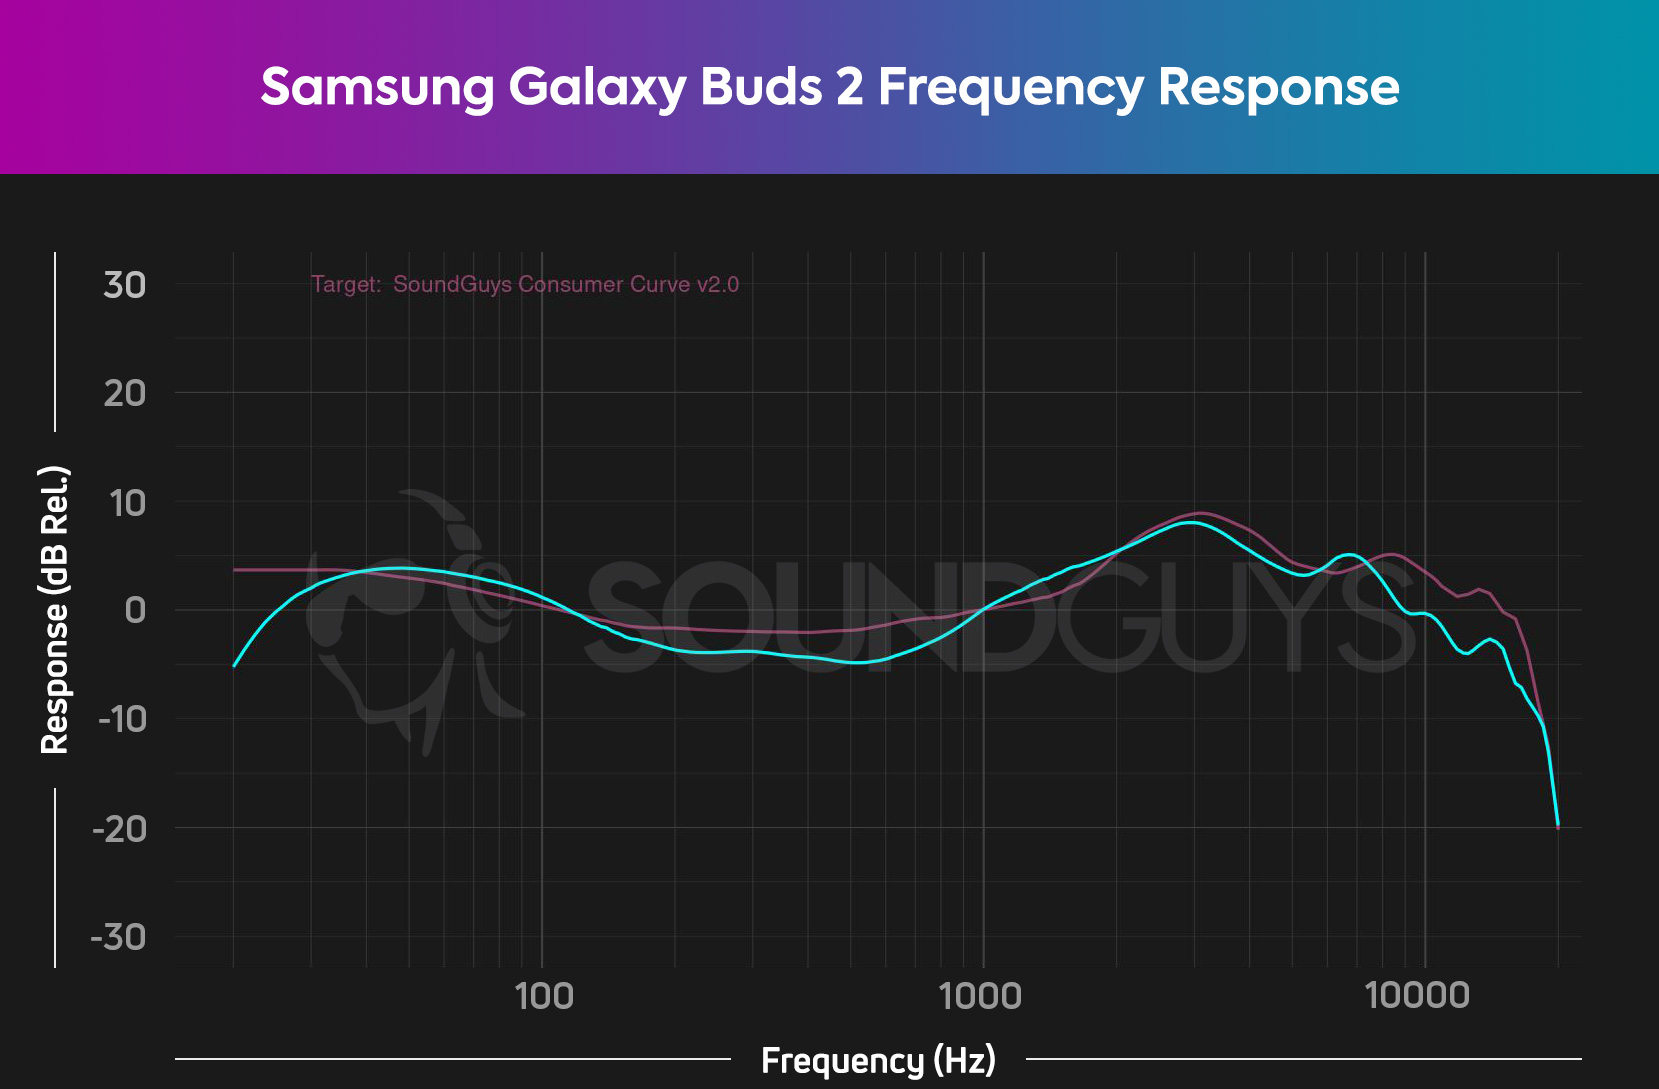 A chart depicts the Samsung Galaxy Buds 2 frequency response (cyan) relative to the SoundGuys Consumer Curve V2.0.